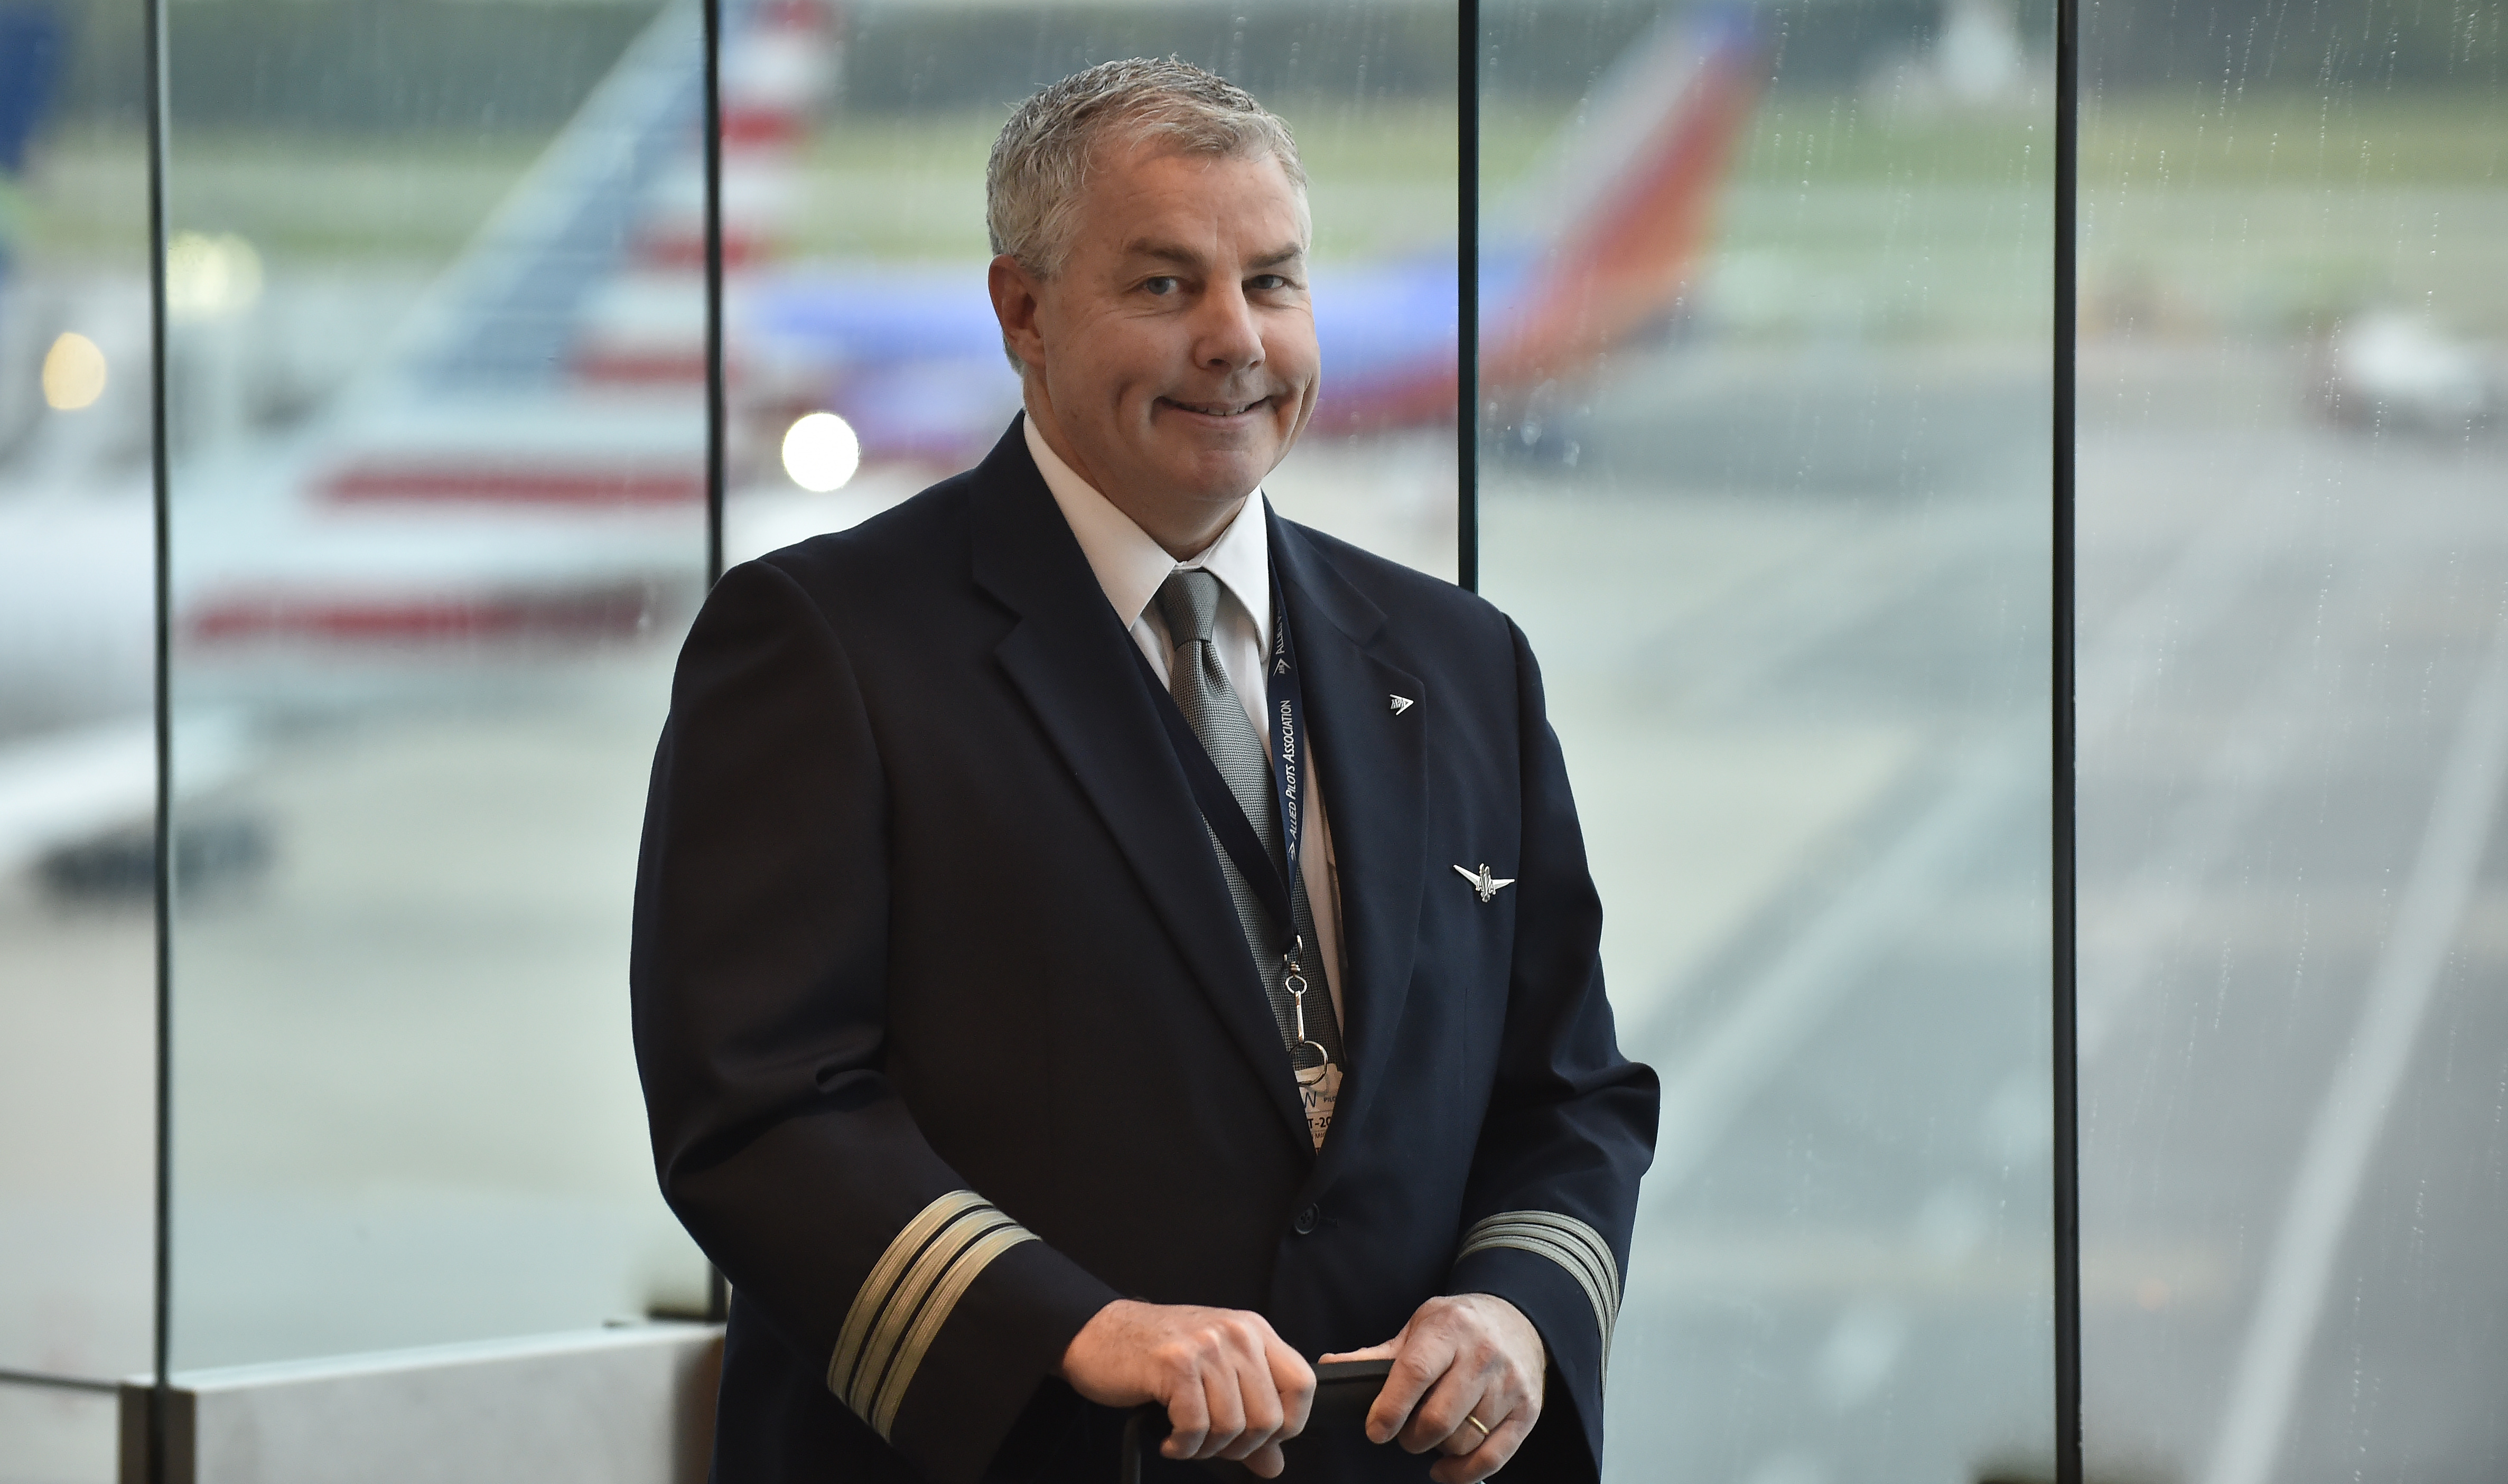 Commercial airliners frame American Airlines first officer Steve Clarke as he pauses for photos at Baltimore/Washington International Thurgood Marshall Airport before a flight to San Francisco May 17. Photo by David Tulis.                                       